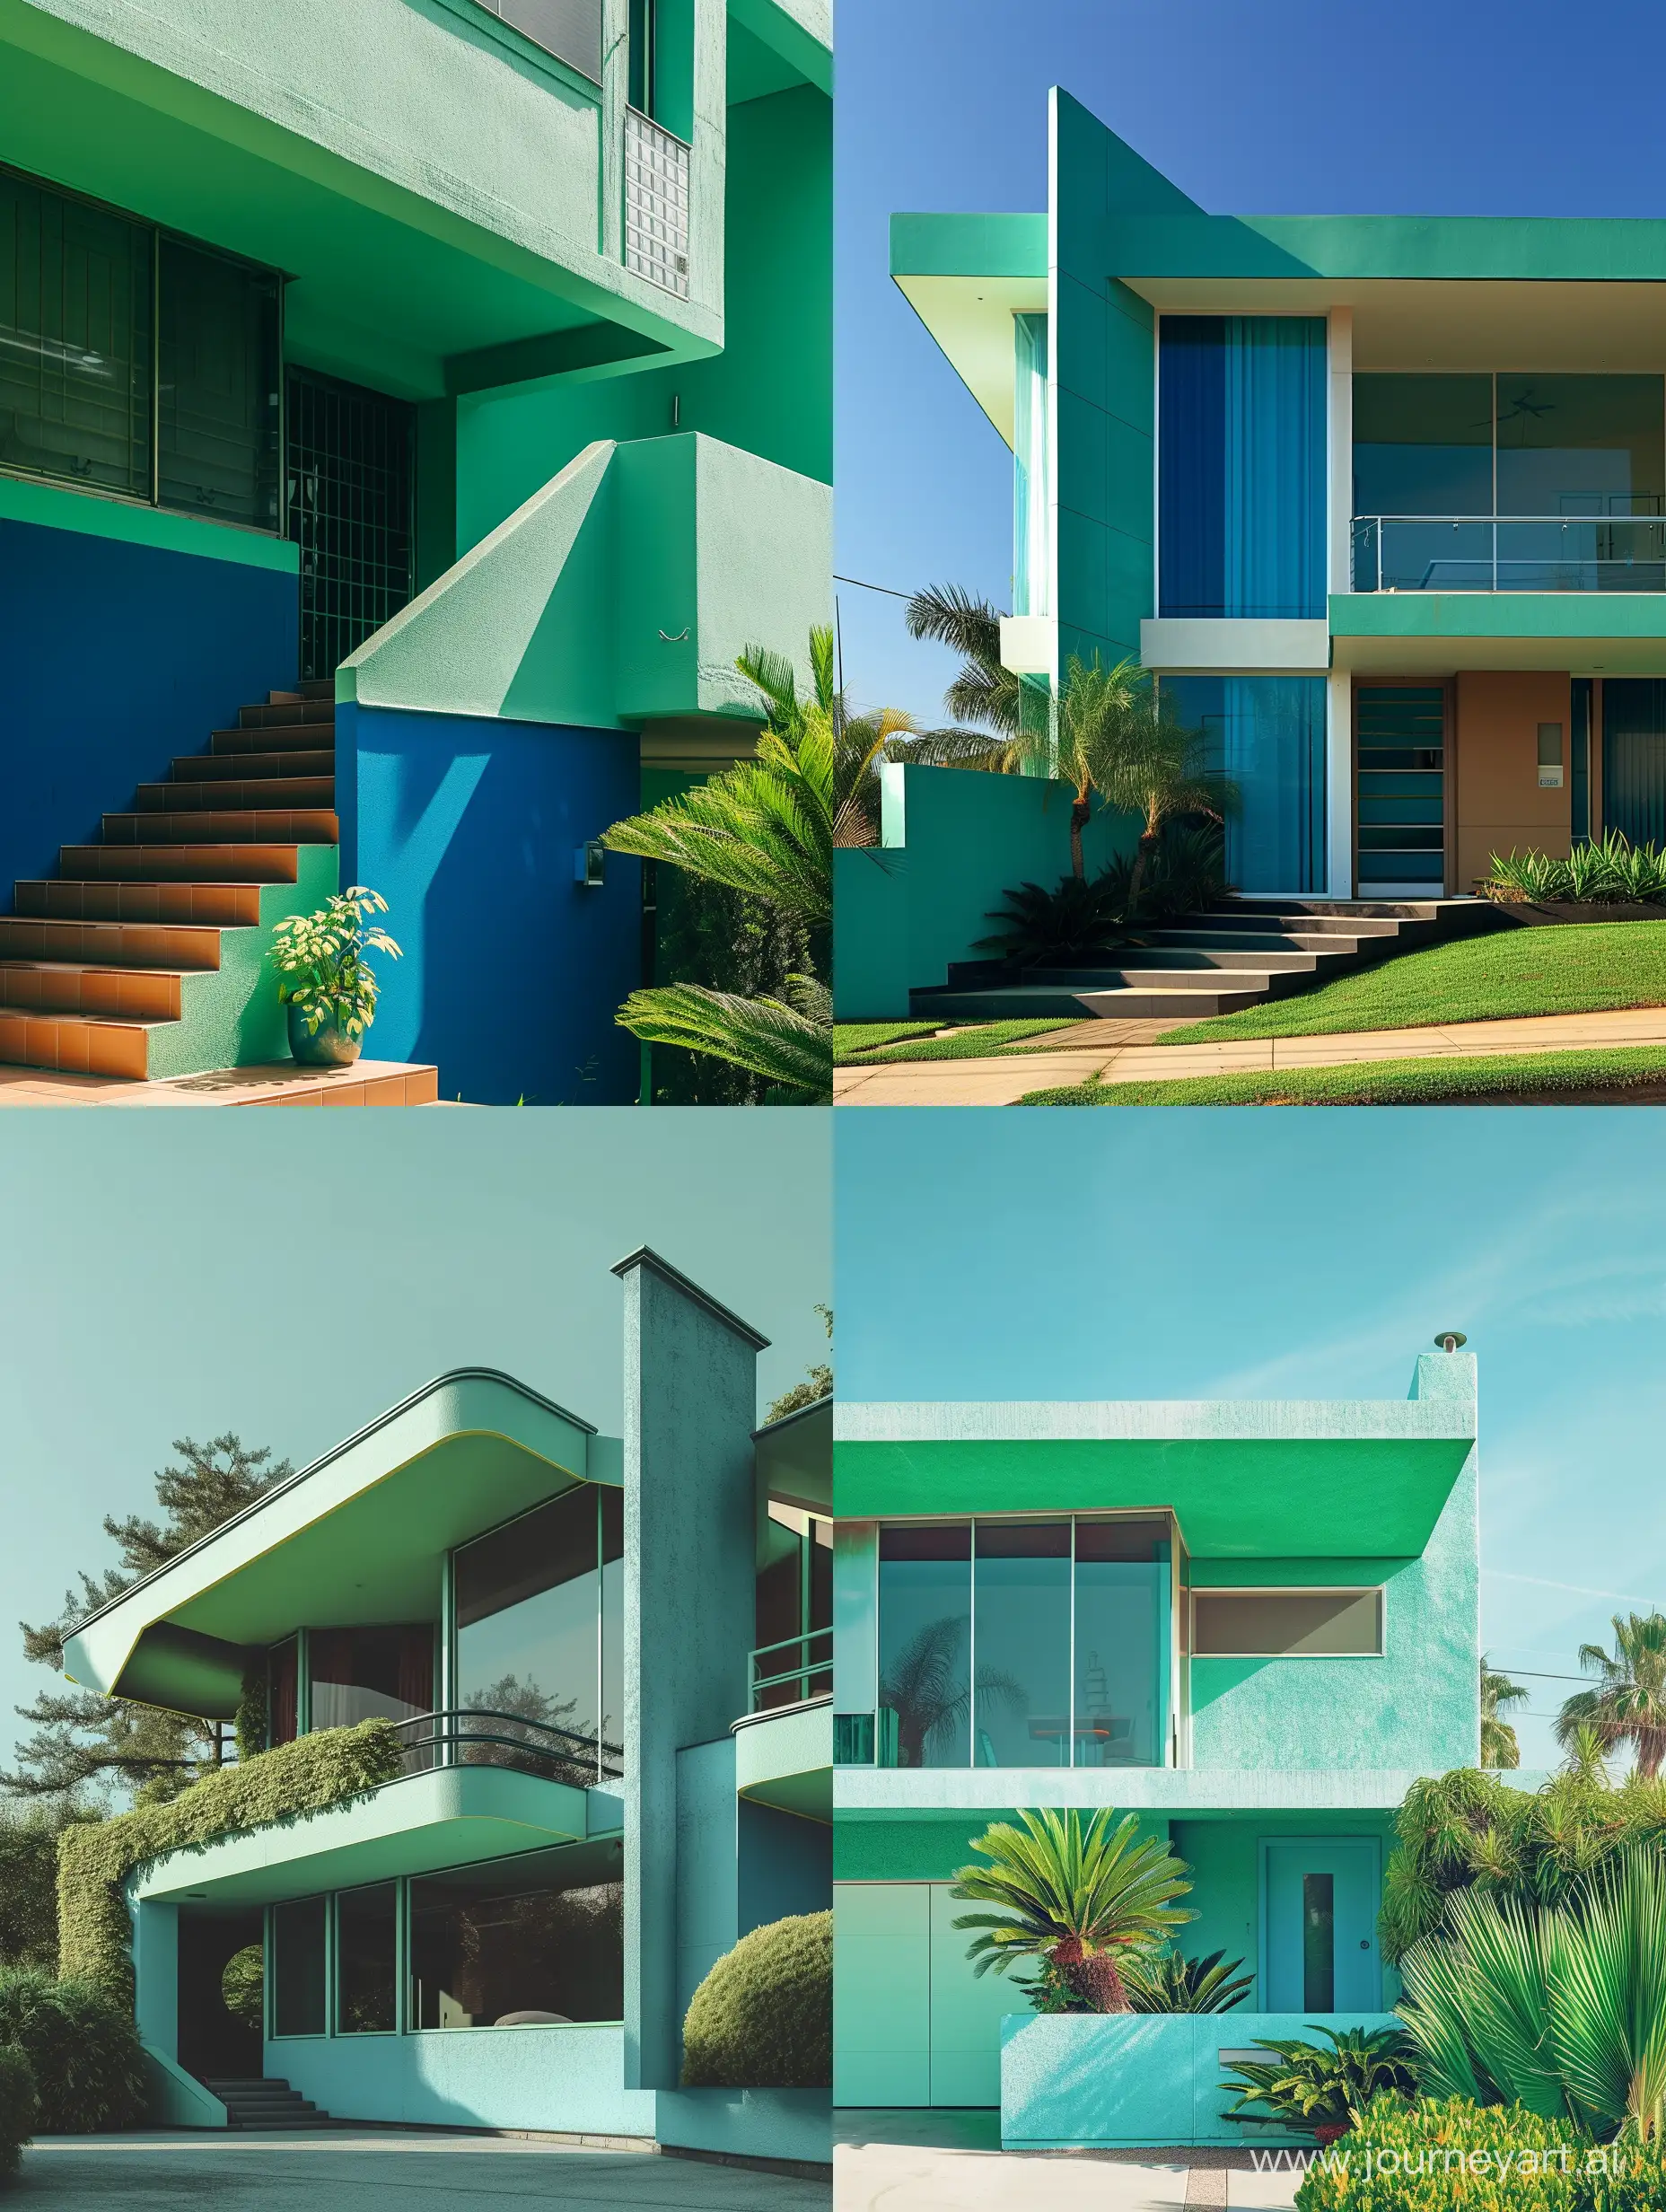 Vintage-70s-Style-House-in-Green-and-Blue-Tones